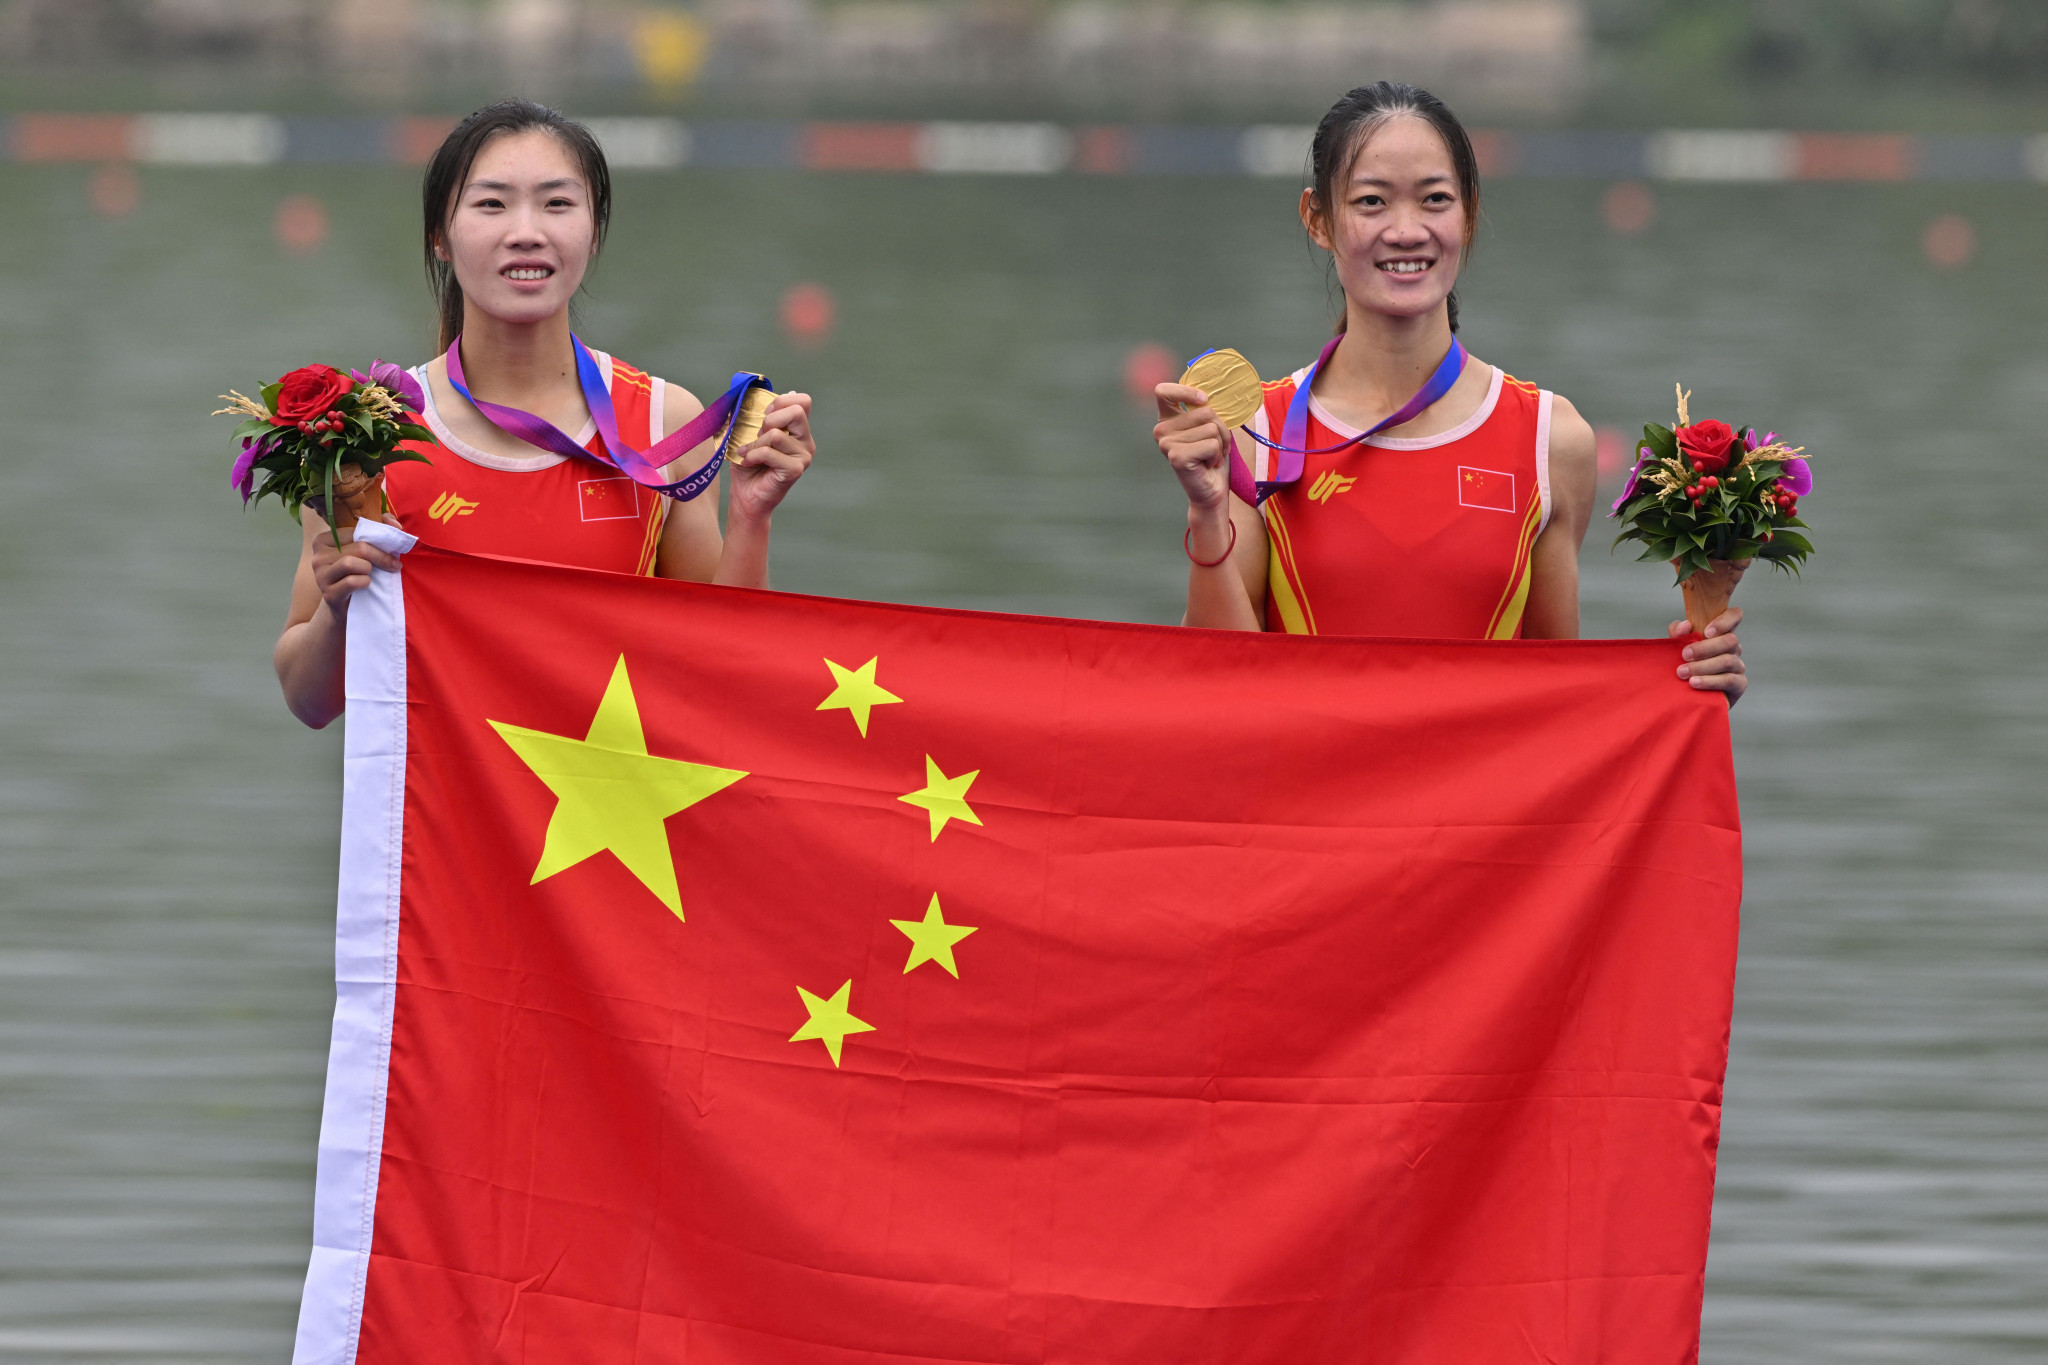 This included the first title of the entire Games, going to lightweight women's double sculls champions Zou Jiaqi and Qiu Xiuping ©Getty Images